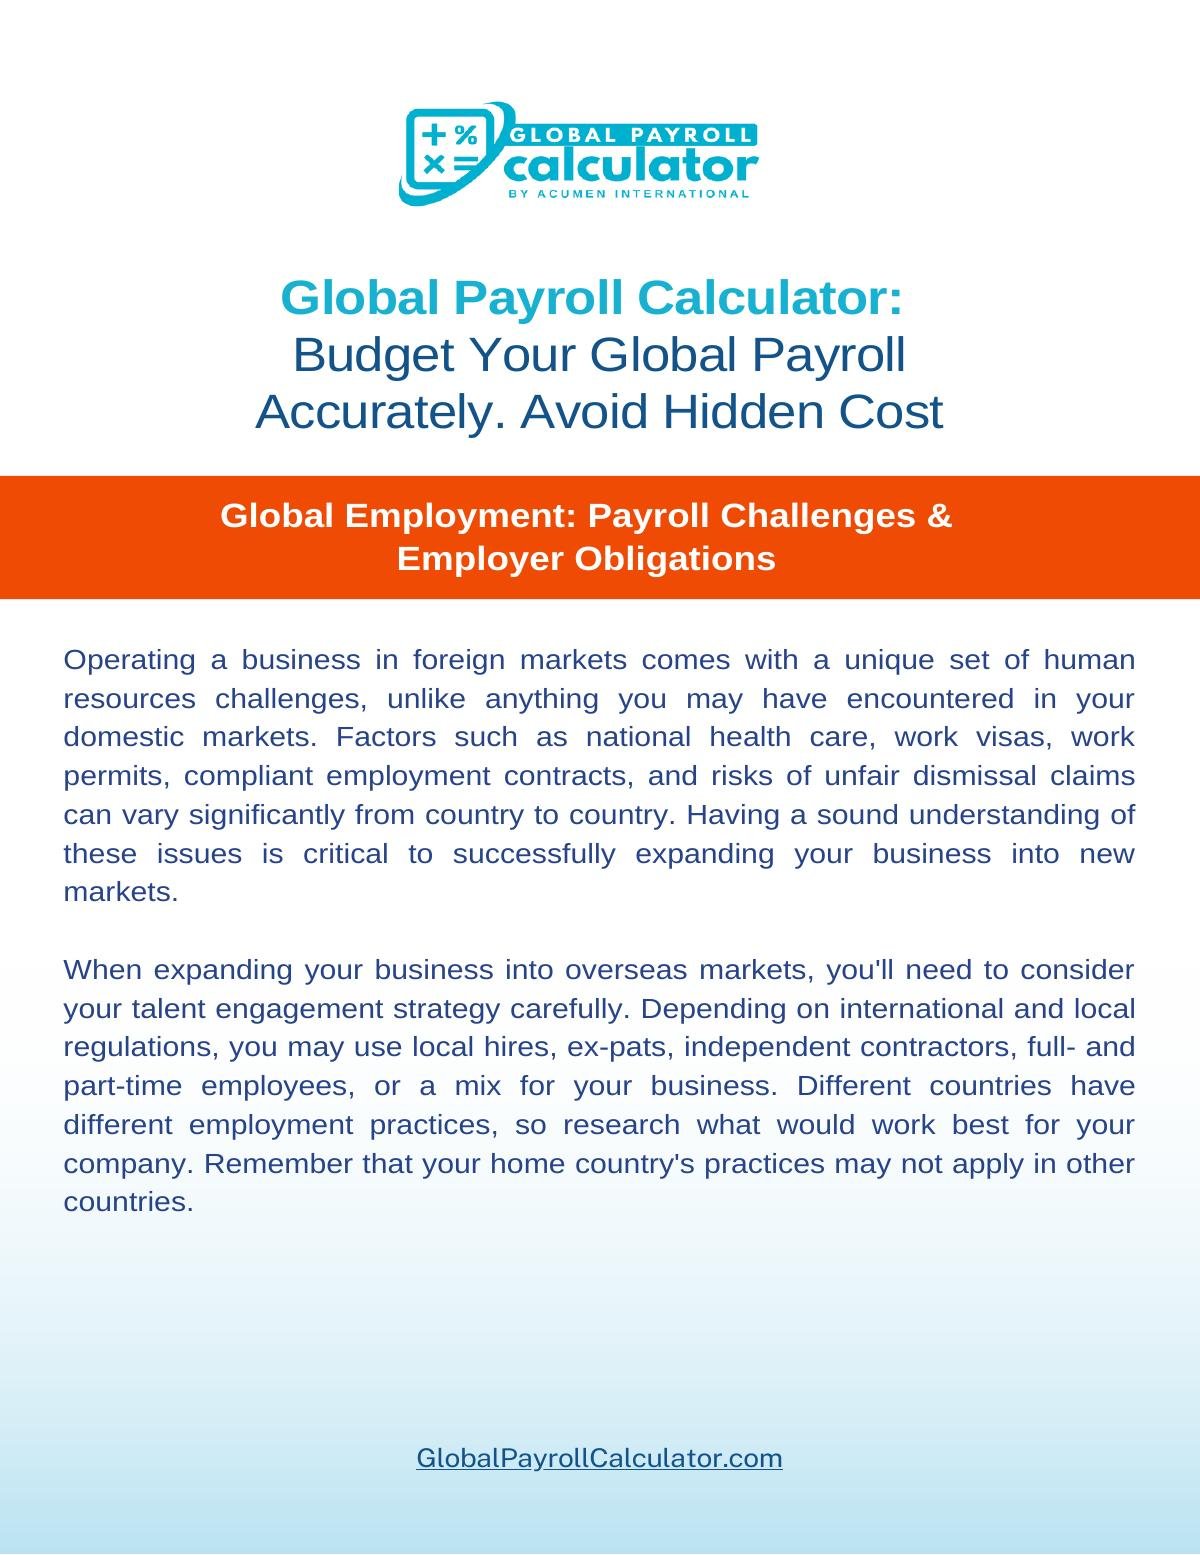 Global Payroll Calculator: Budget Your Payroll Accurately